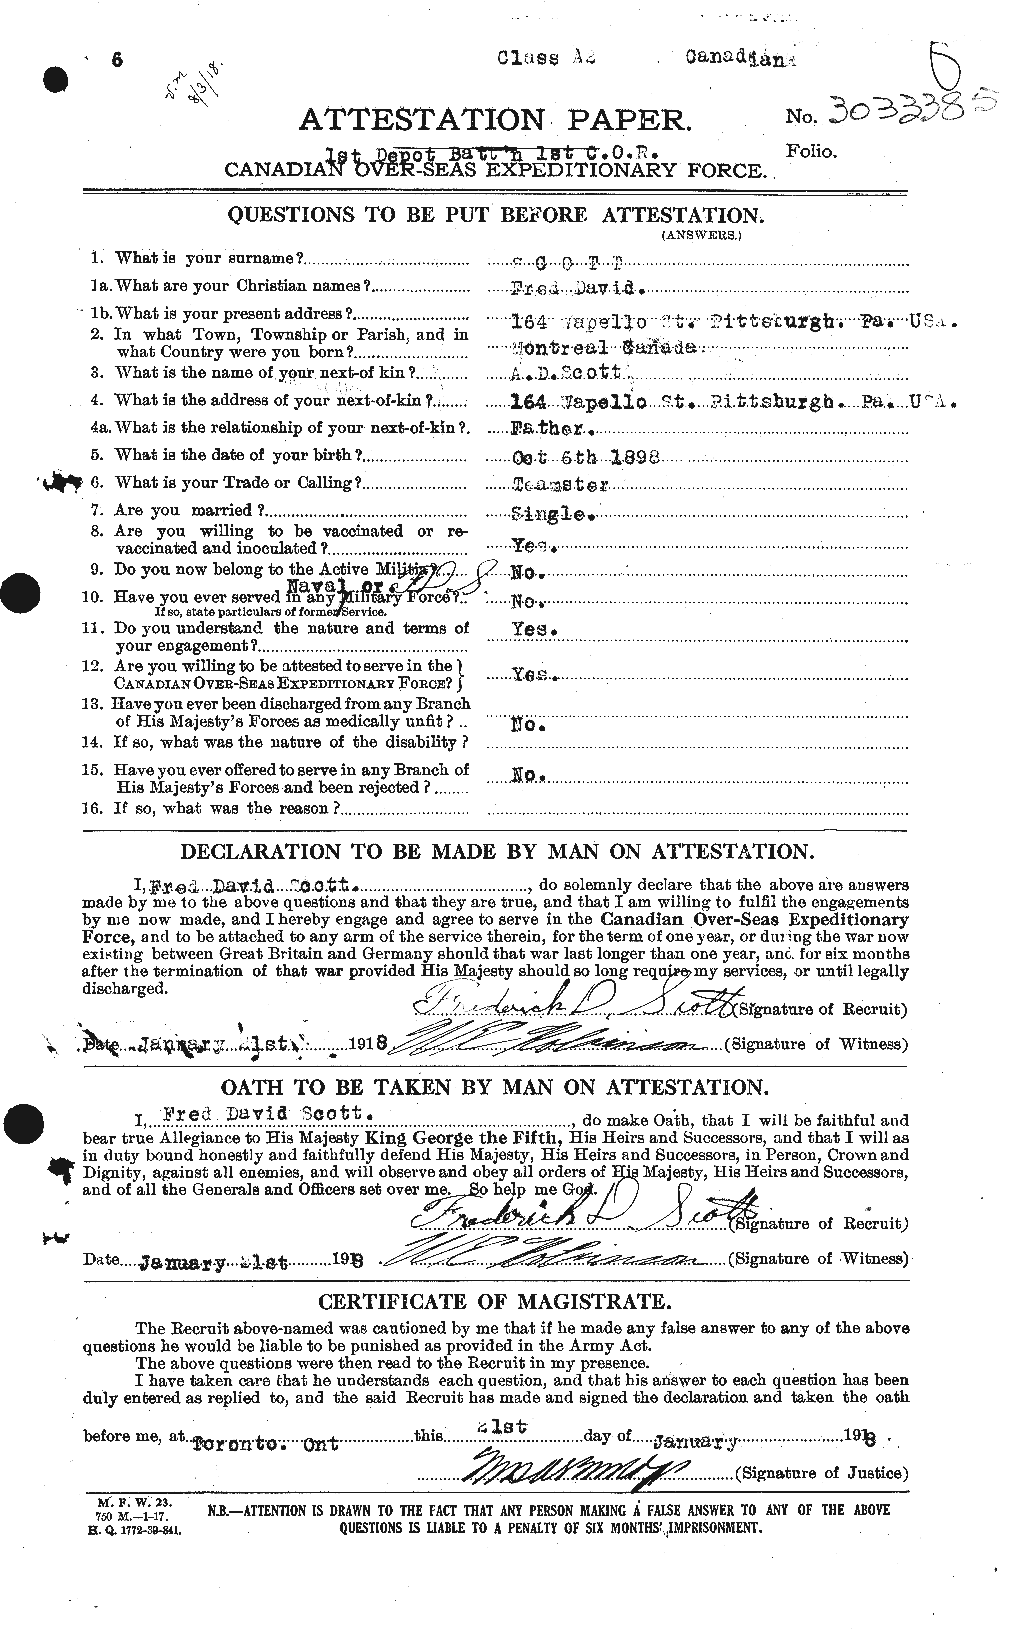 Personnel Records of the First World War - CEF 084679a